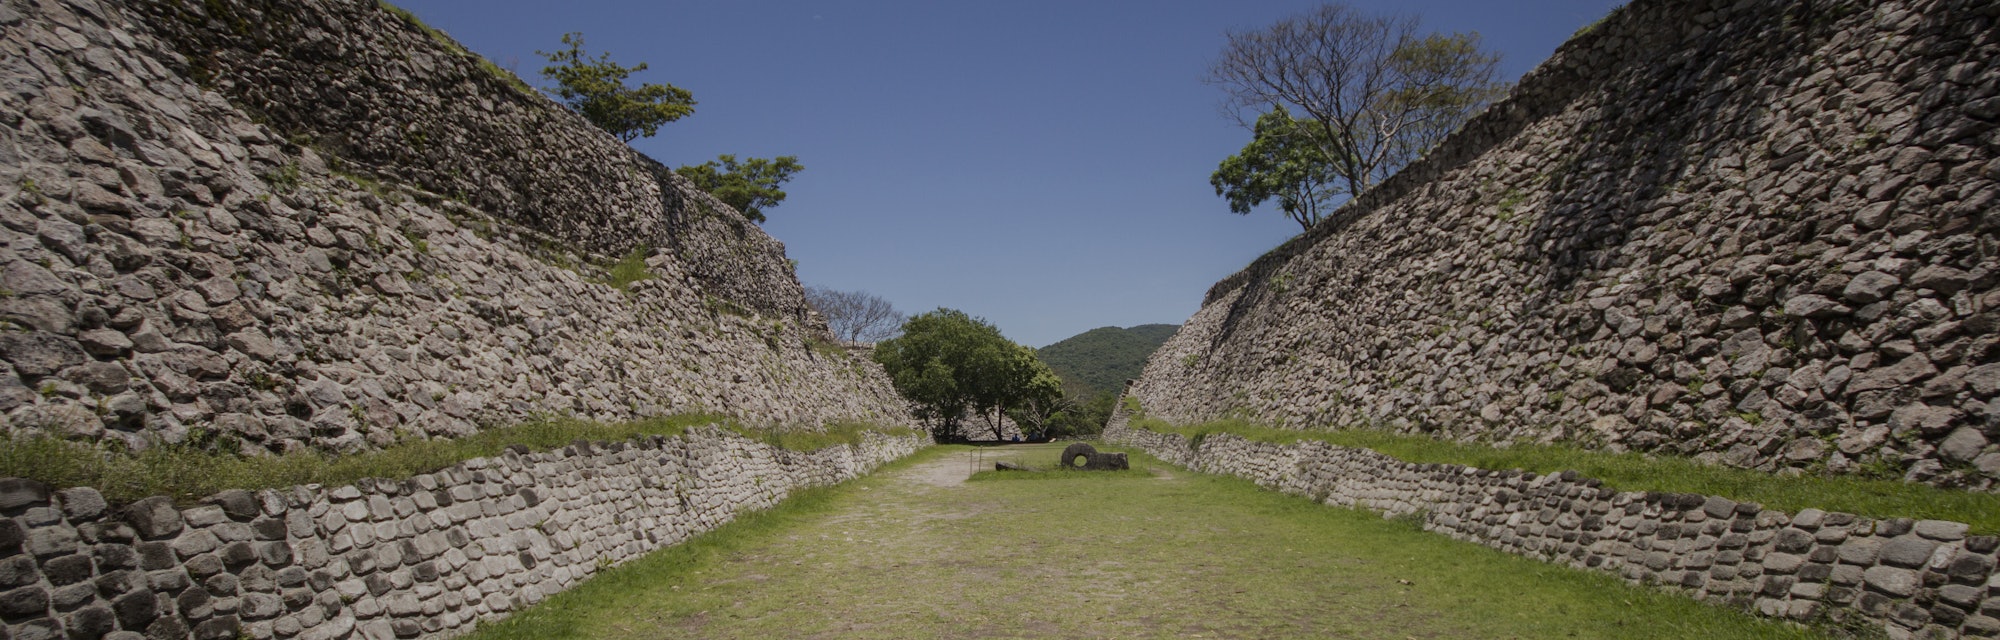 Ball game in the archaeological zone of Xochicalco